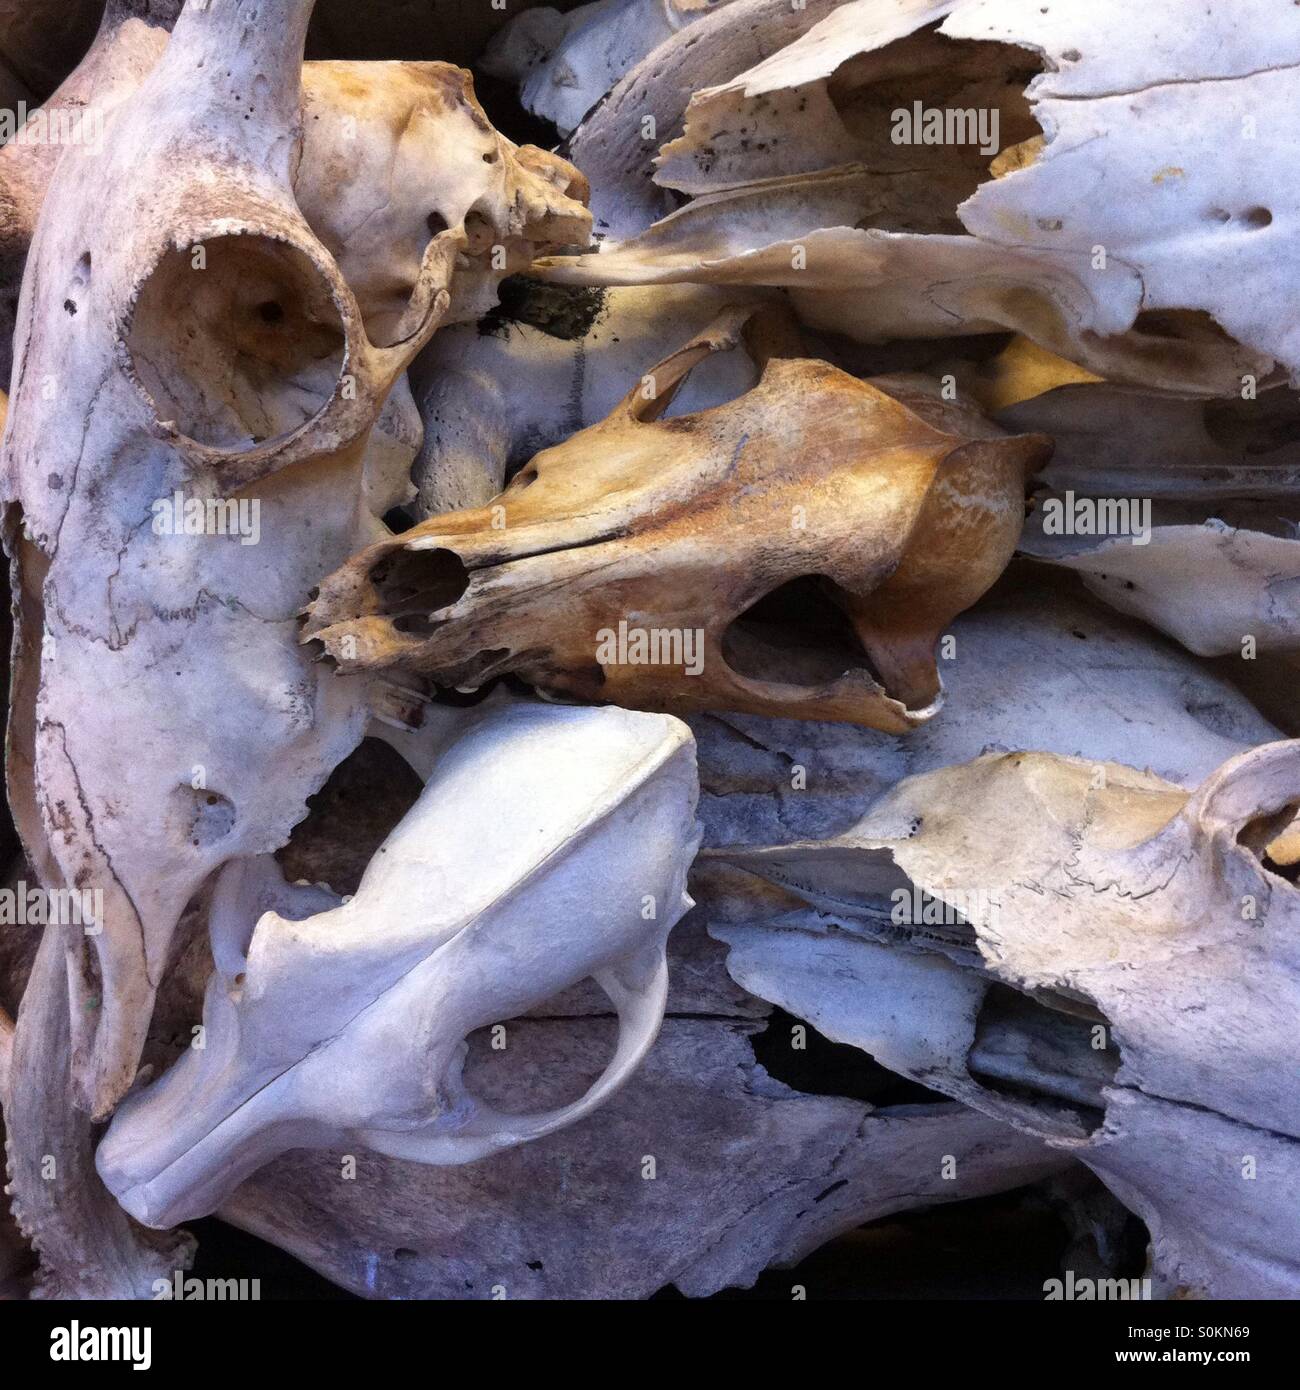 Collection of animal skulls in an artists studio Stock Photo